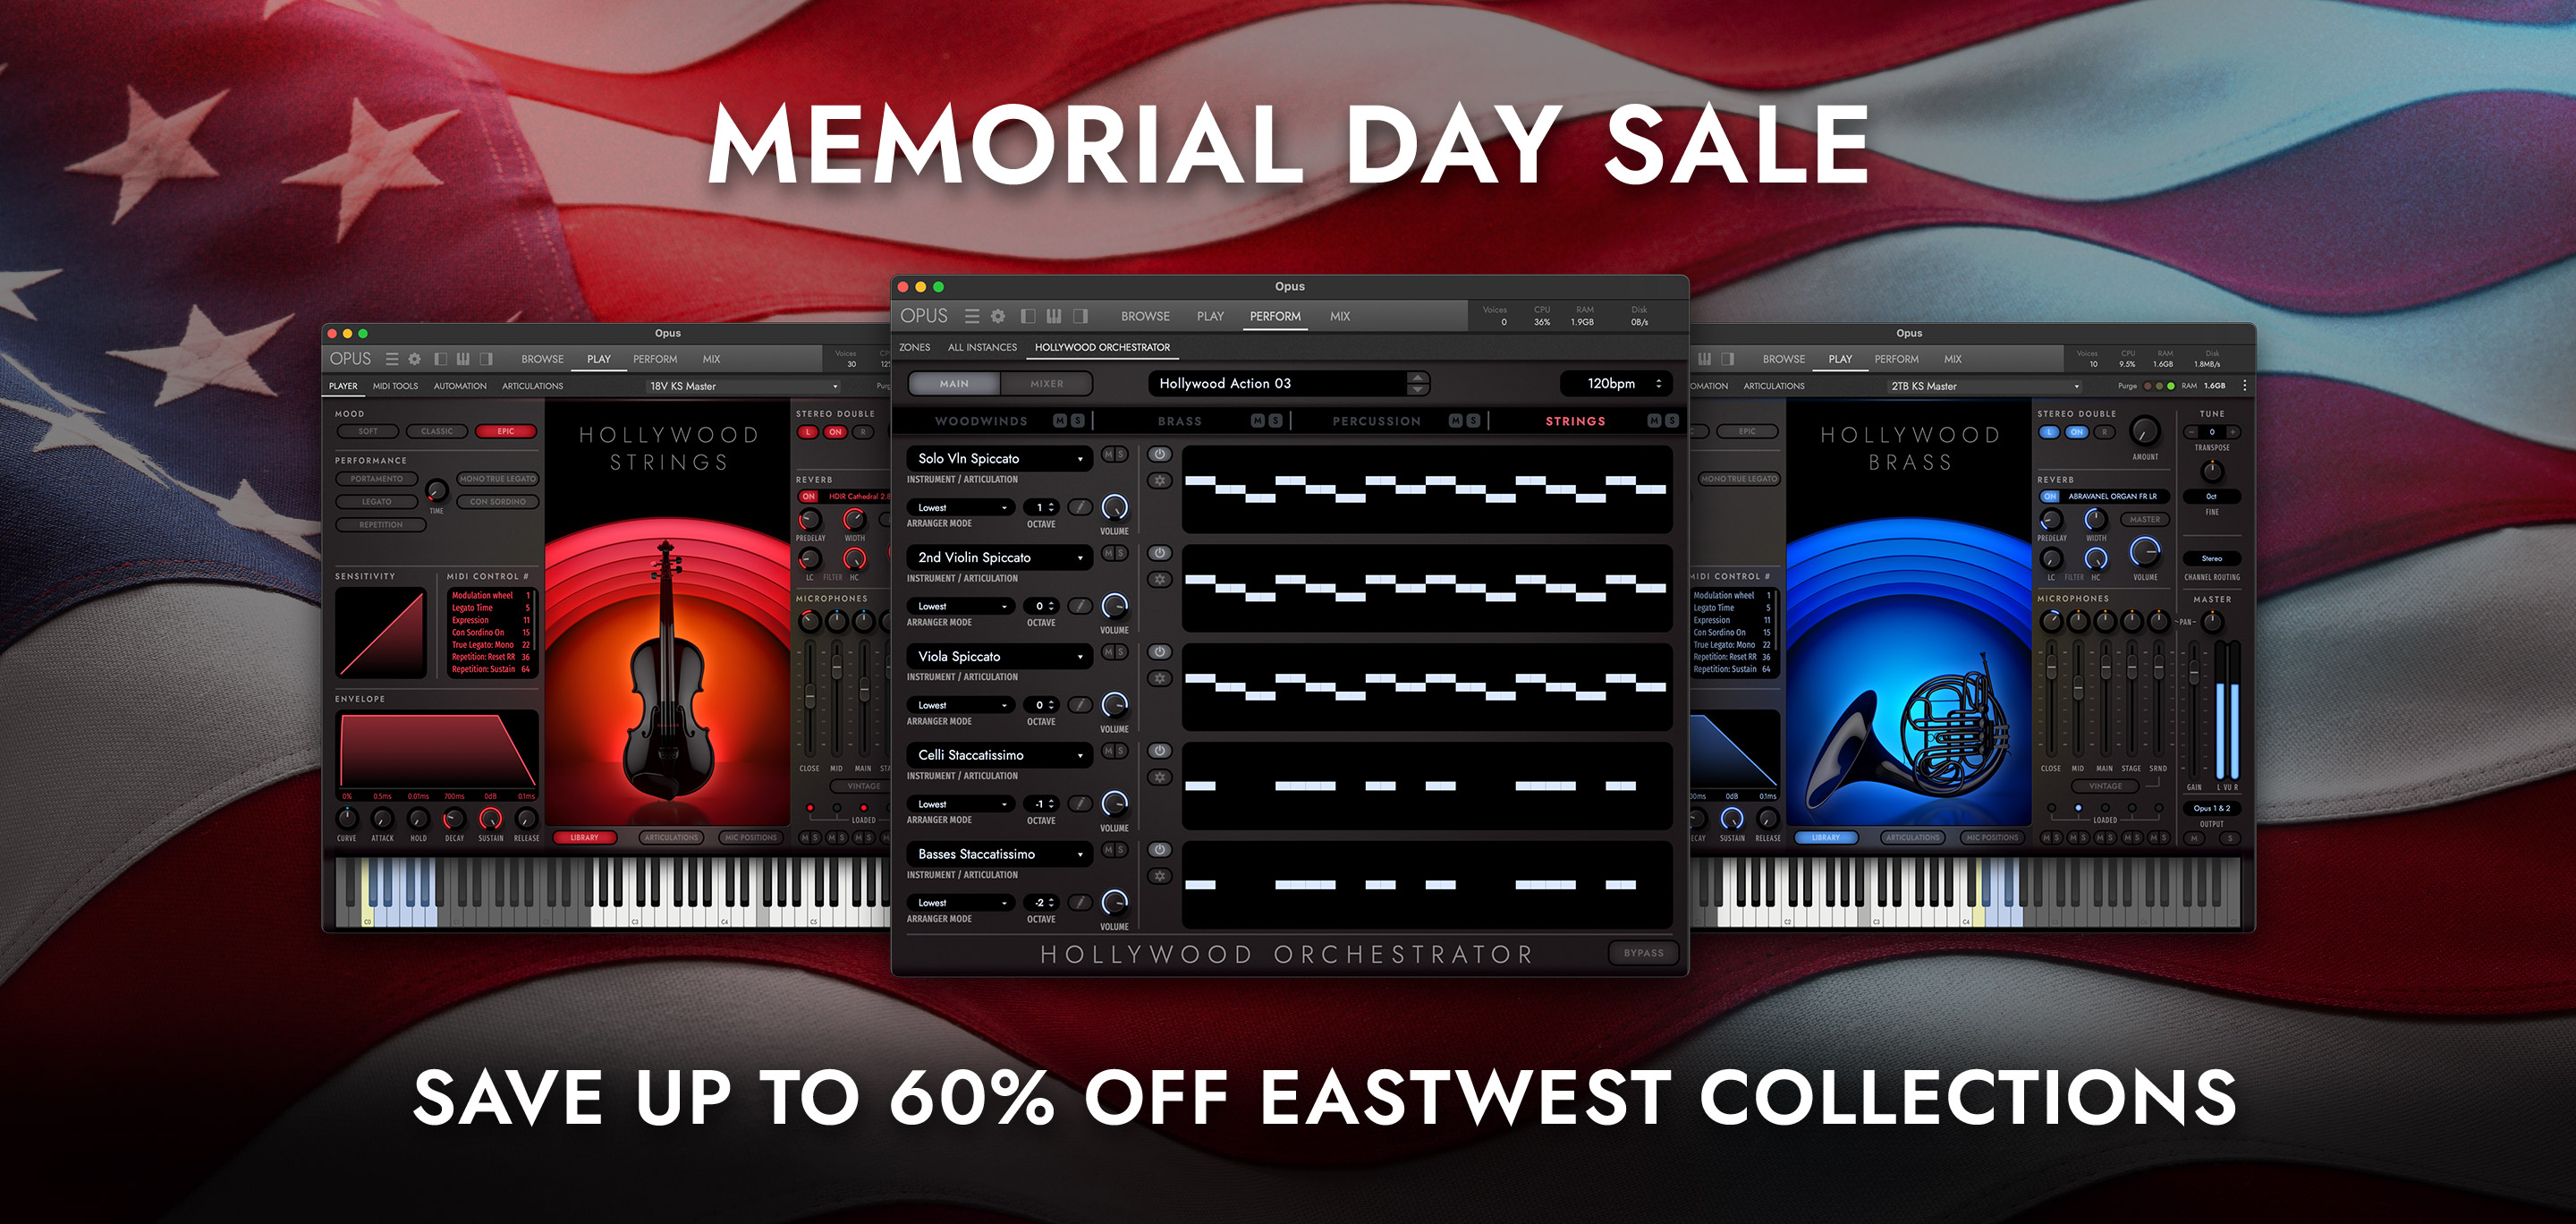 EastWest Memorial Day Sale - Save up to 60% EastWest Collections